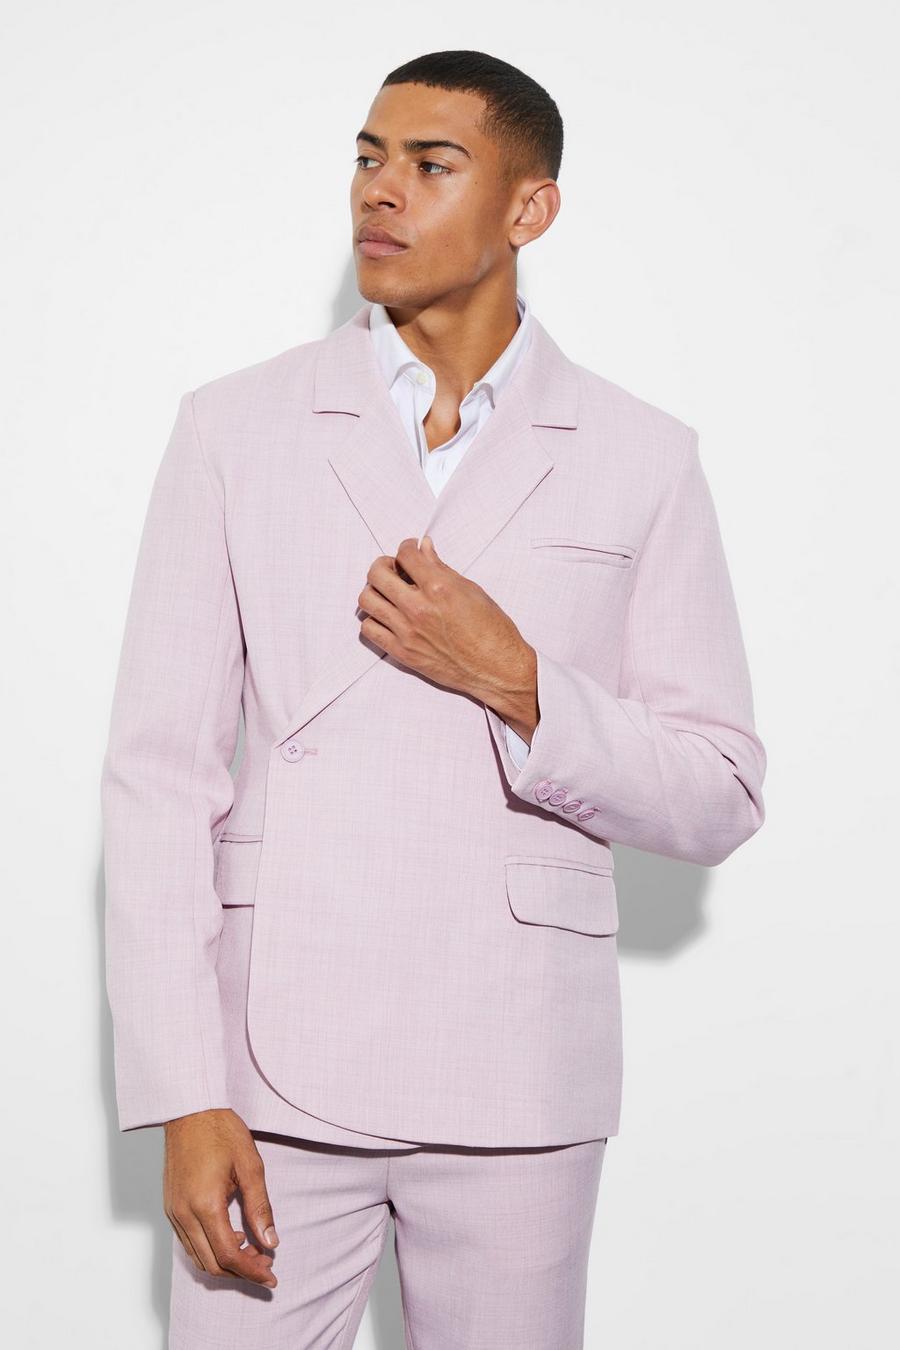 Giacca smoking a monopetto Slim Fit in tinta unita, Pale pink rosa